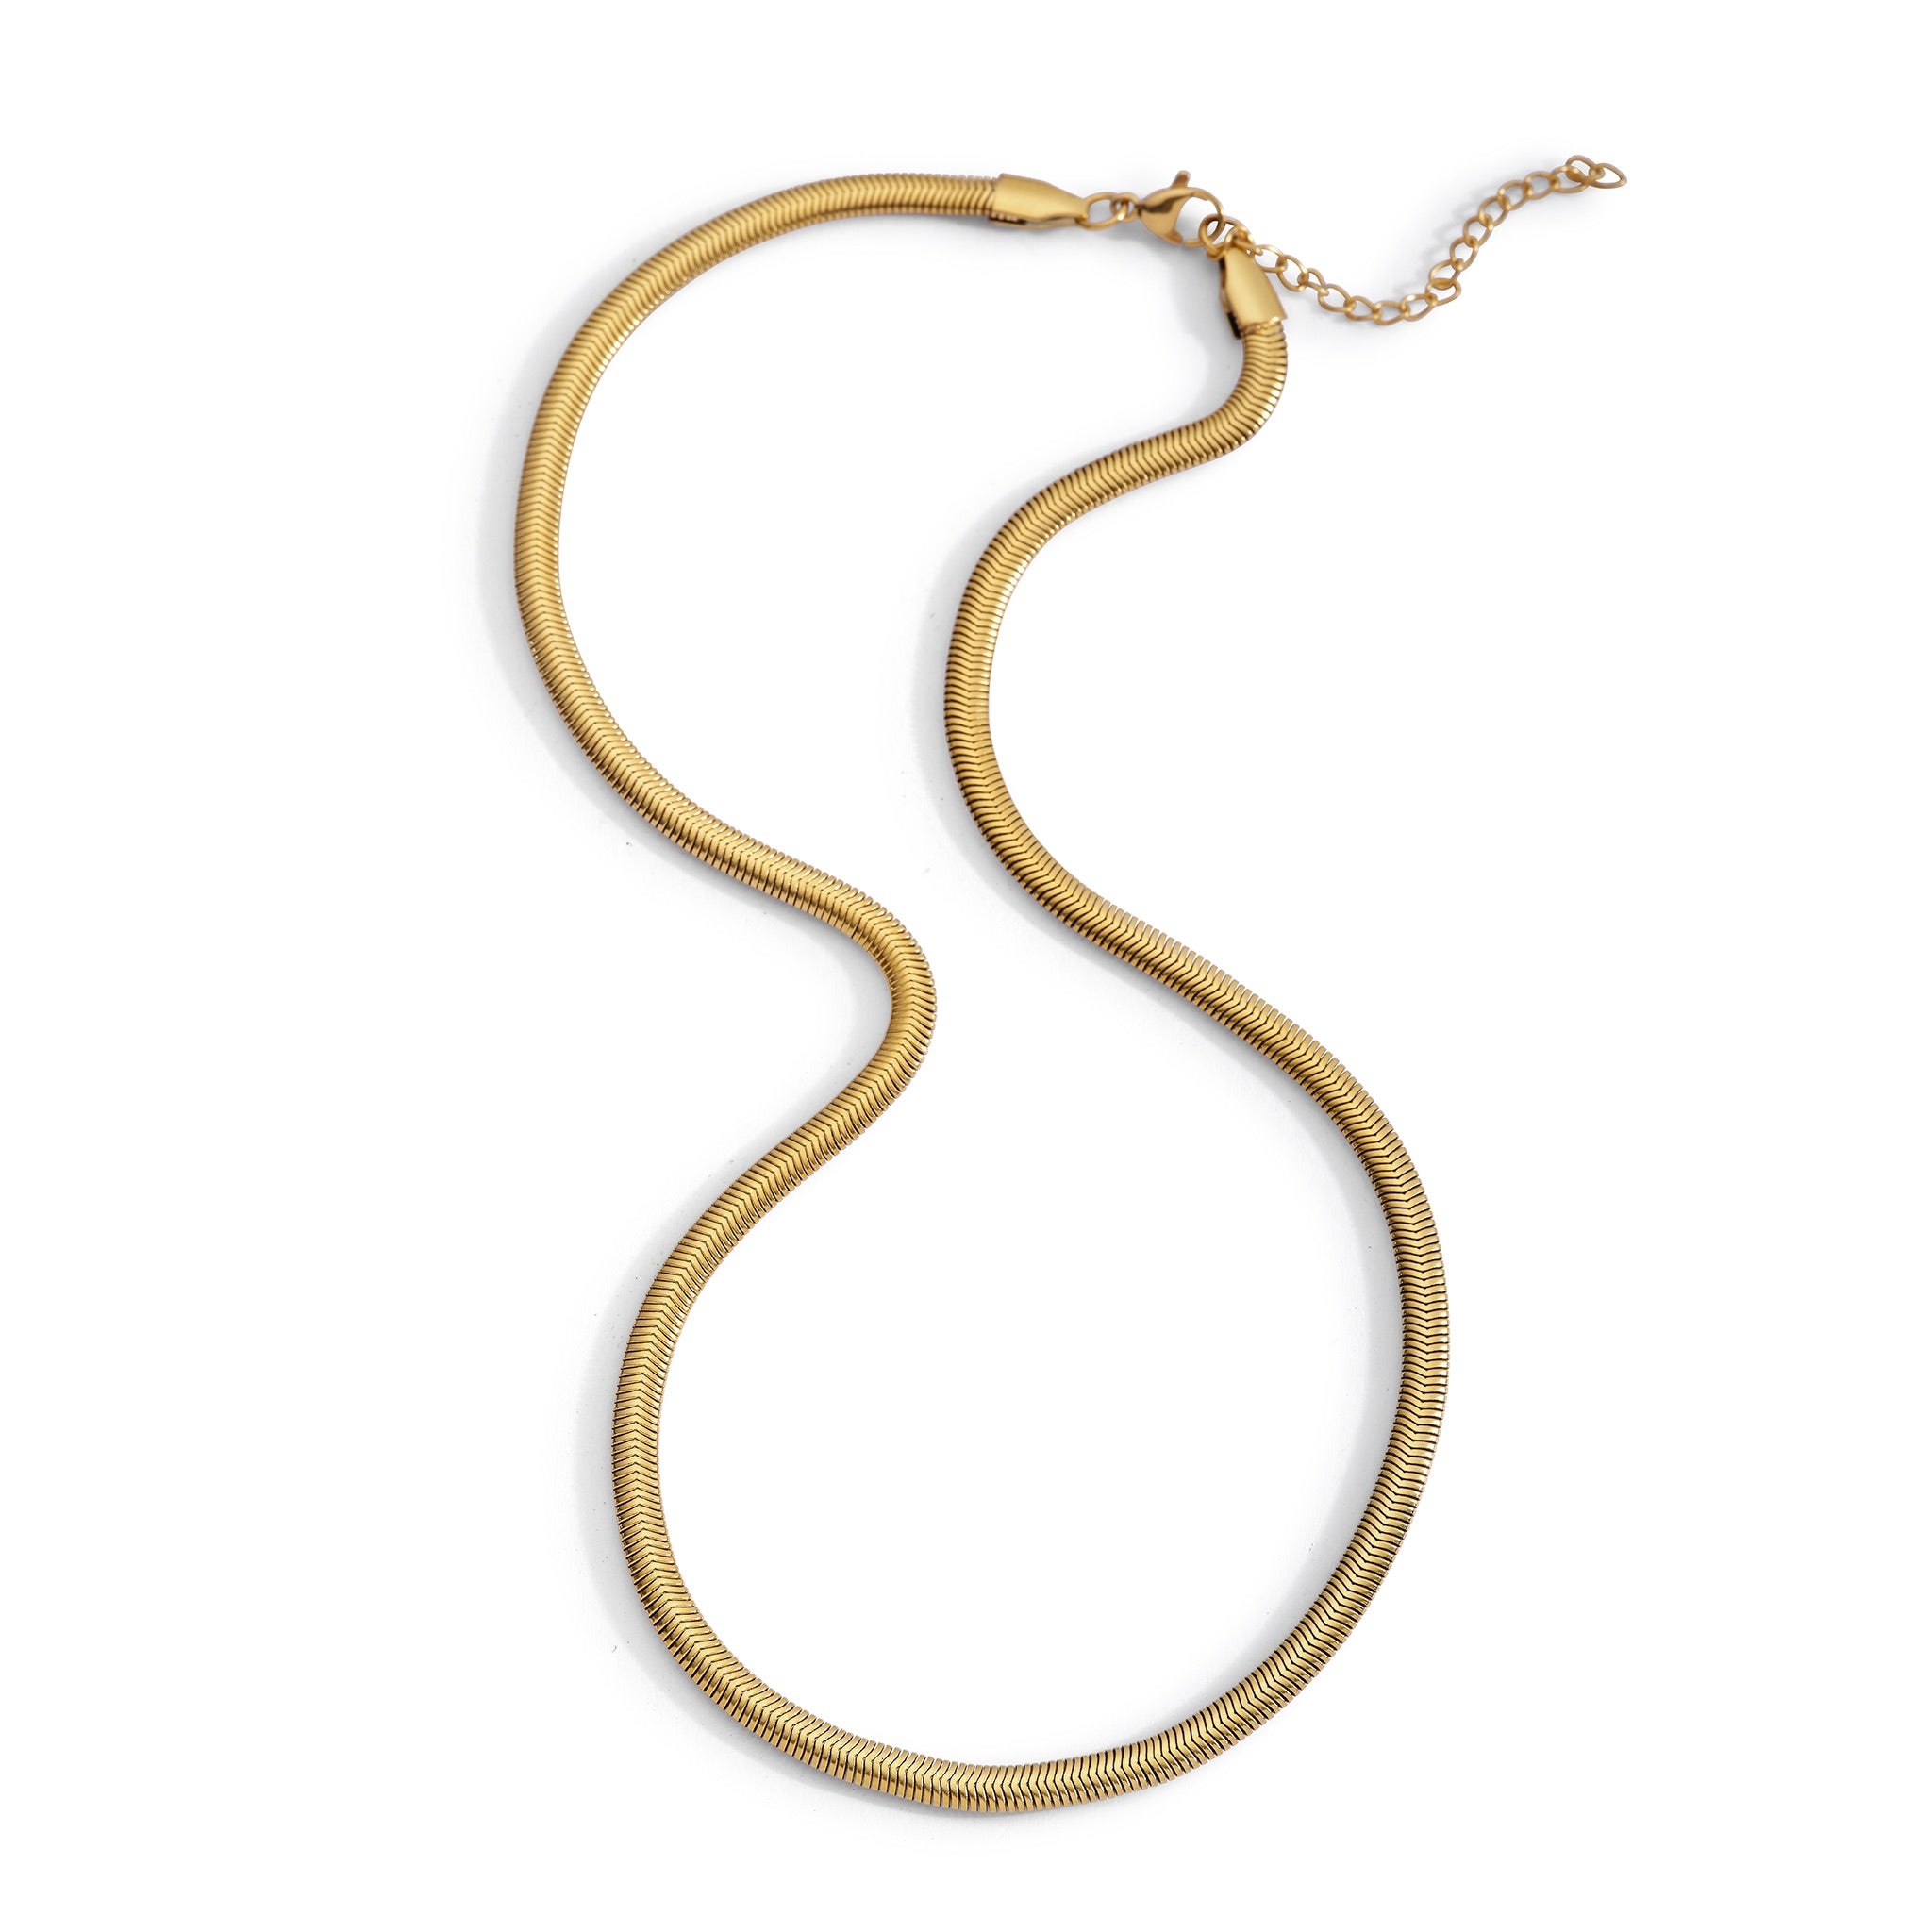 THE MAKERY GOLD SNAKE CHAIN NECKLACE